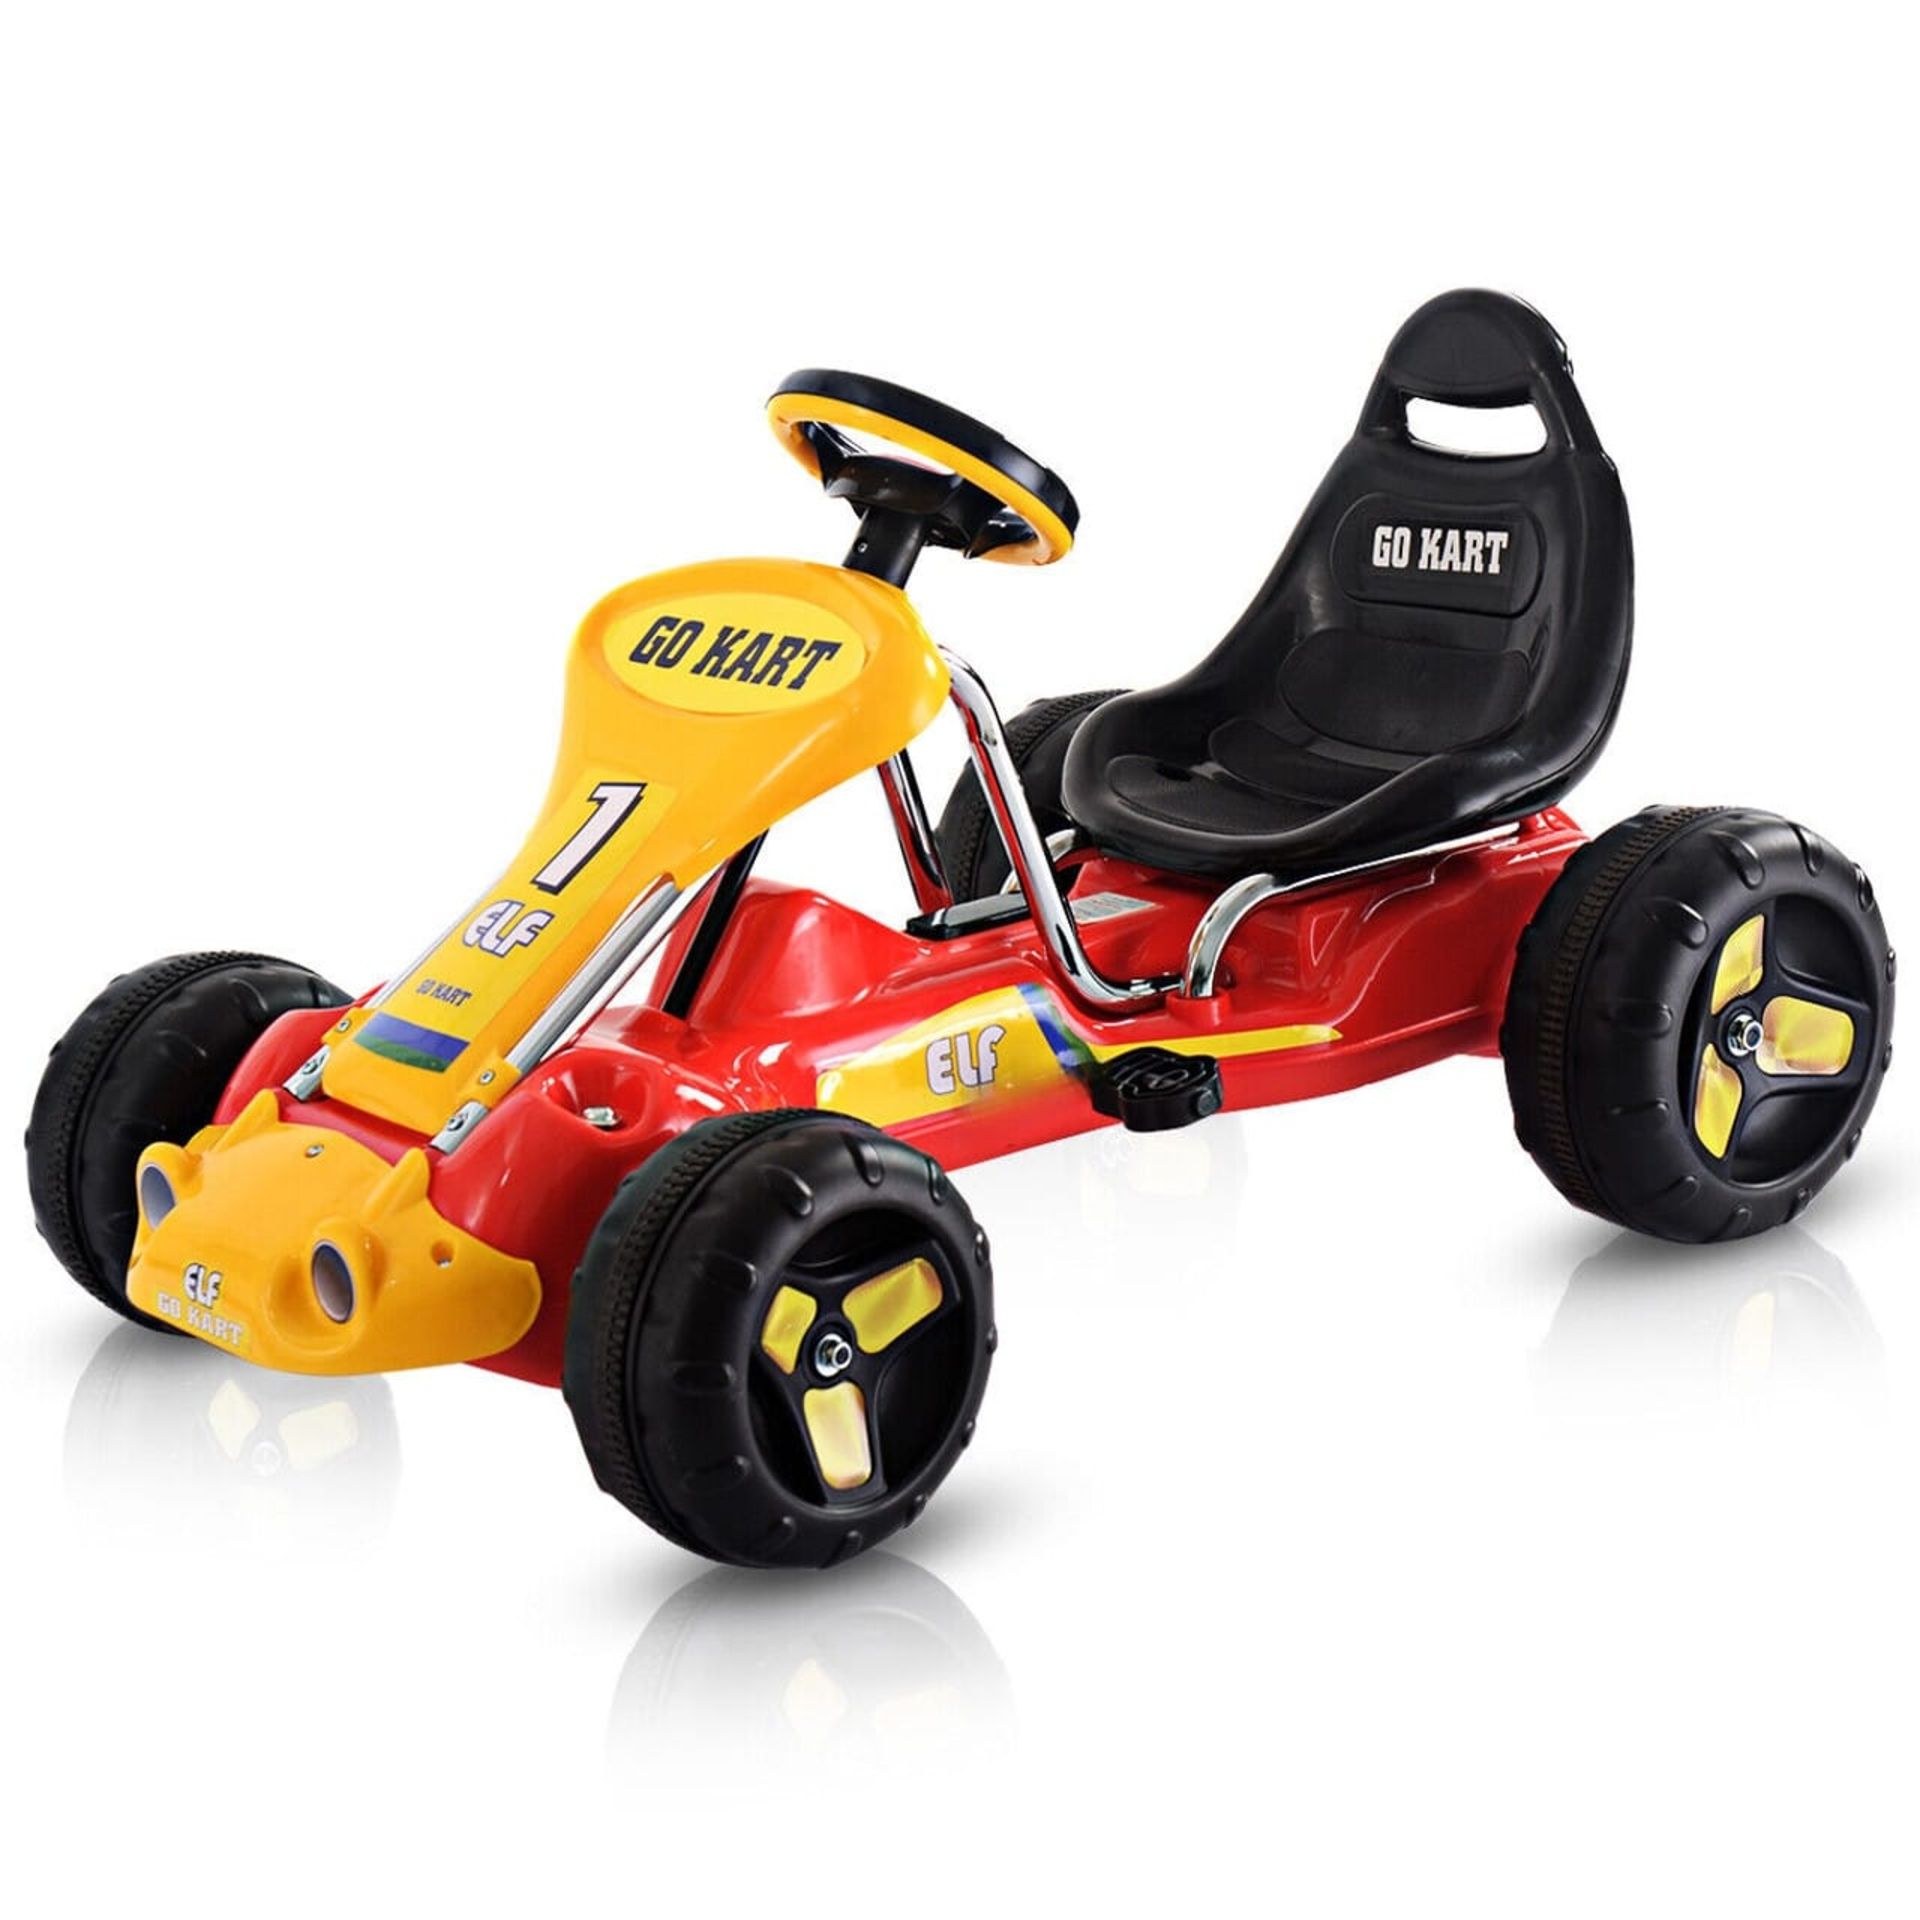 15 X ELECTRIC 6V RIDE ON GO KART - RED / YELLOW £2250- BRAND NEW FOR KIDS